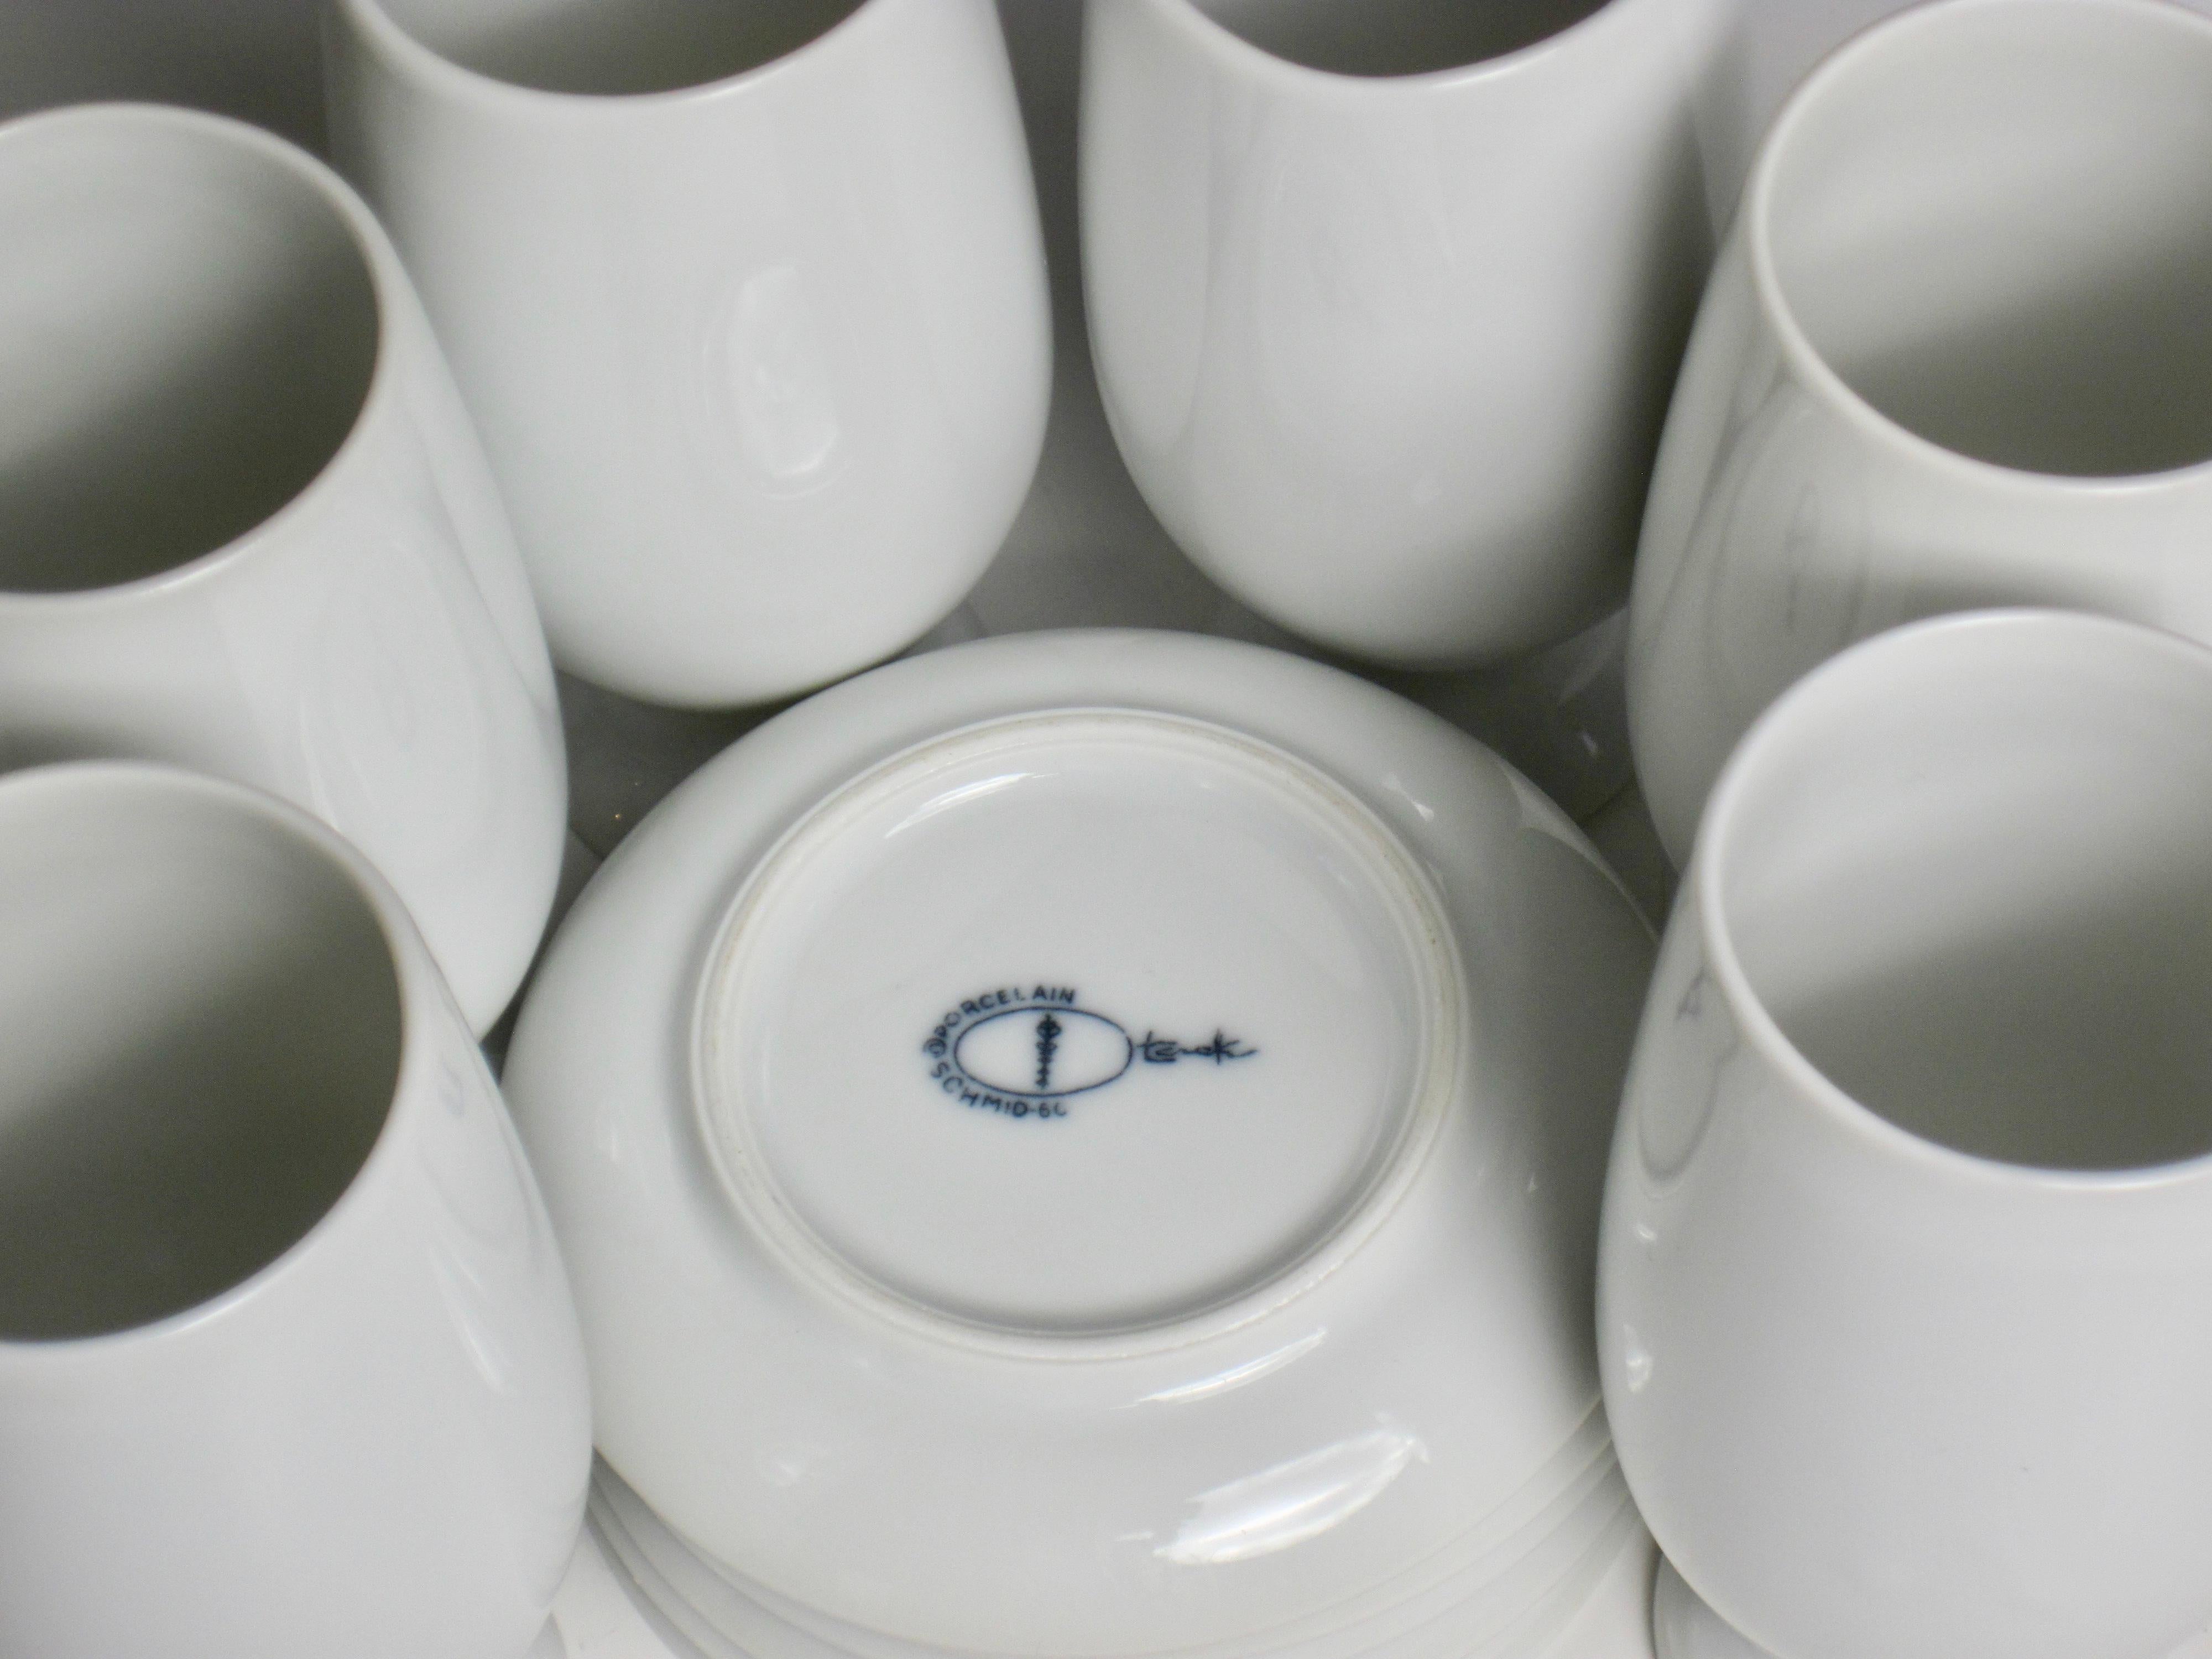 Set of Six Espresso Cups and Saucers Designed by Lagardo Tackett for Schmid In Good Condition For Sale In Ferndale, MI